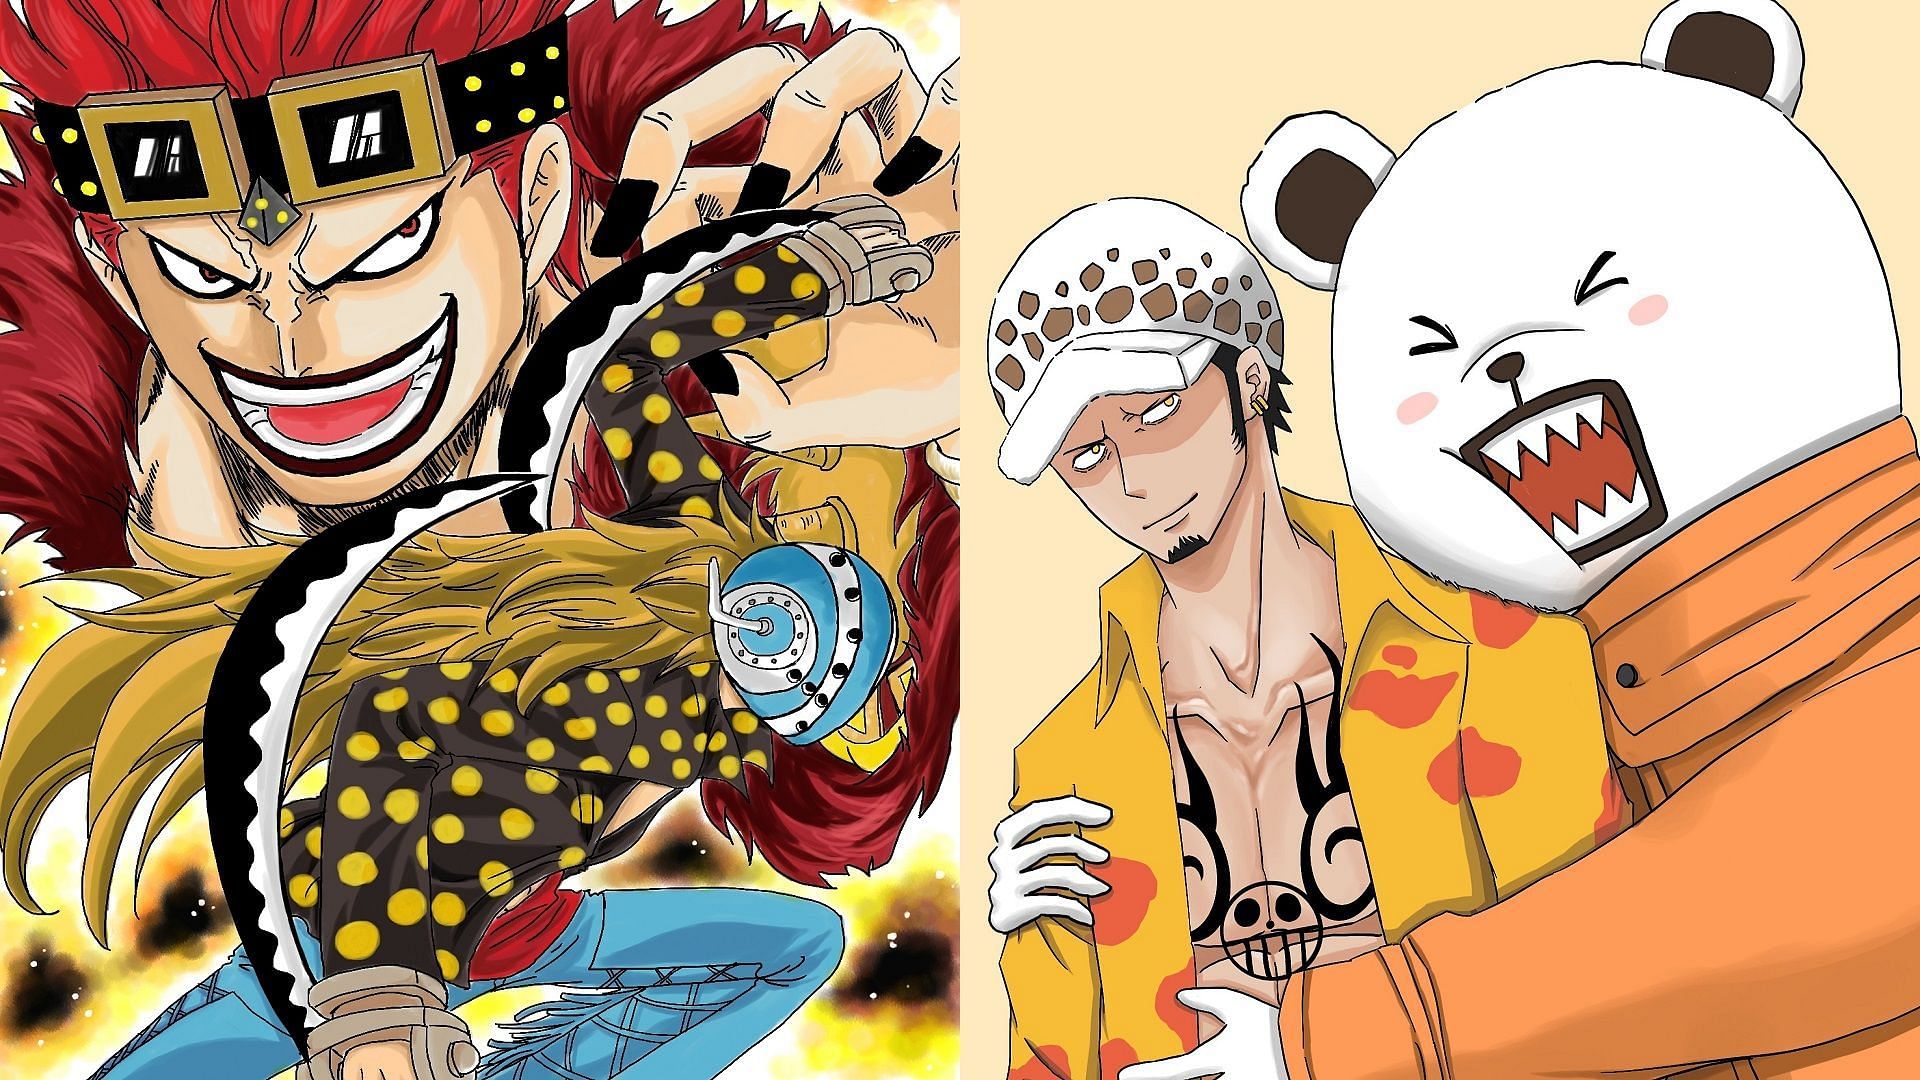 Killer is emphasized to be a much stronger and more competent first mate than Bepo (Image via Eiichiro Oda/Shueisha, One Piece)